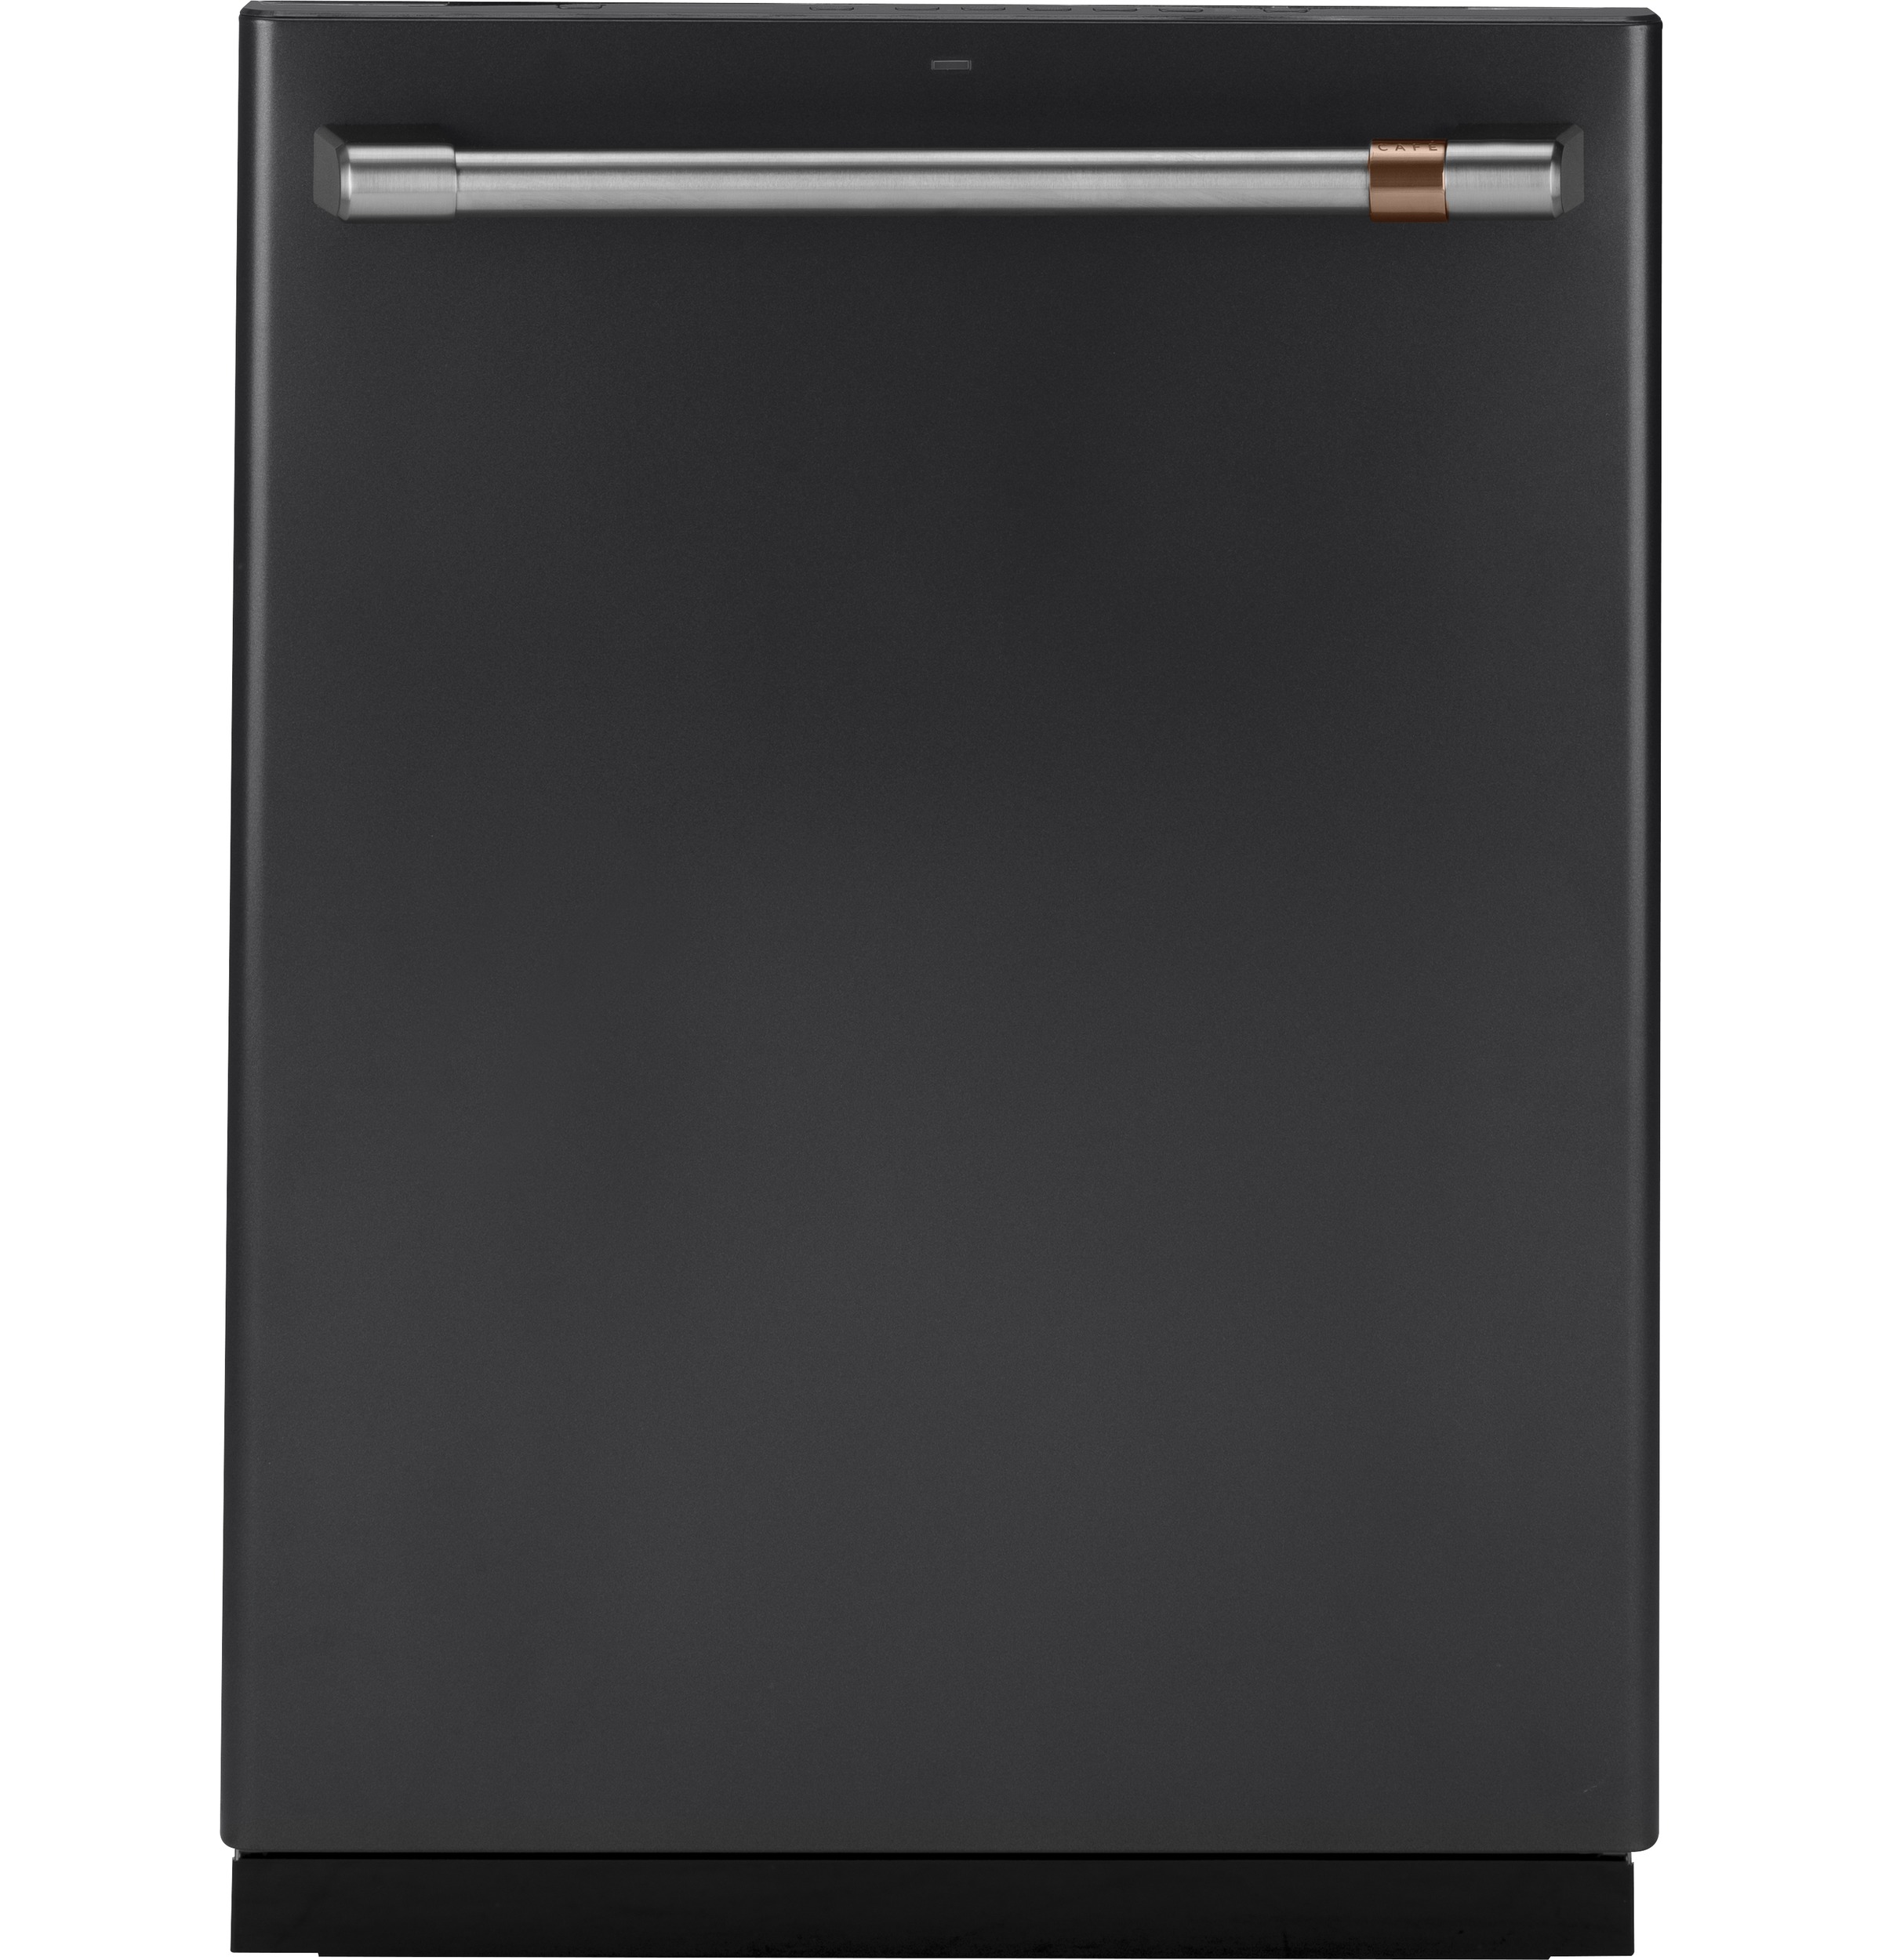 Café™ Stainless Interior Built-In Dishwasher with Hidden Controls